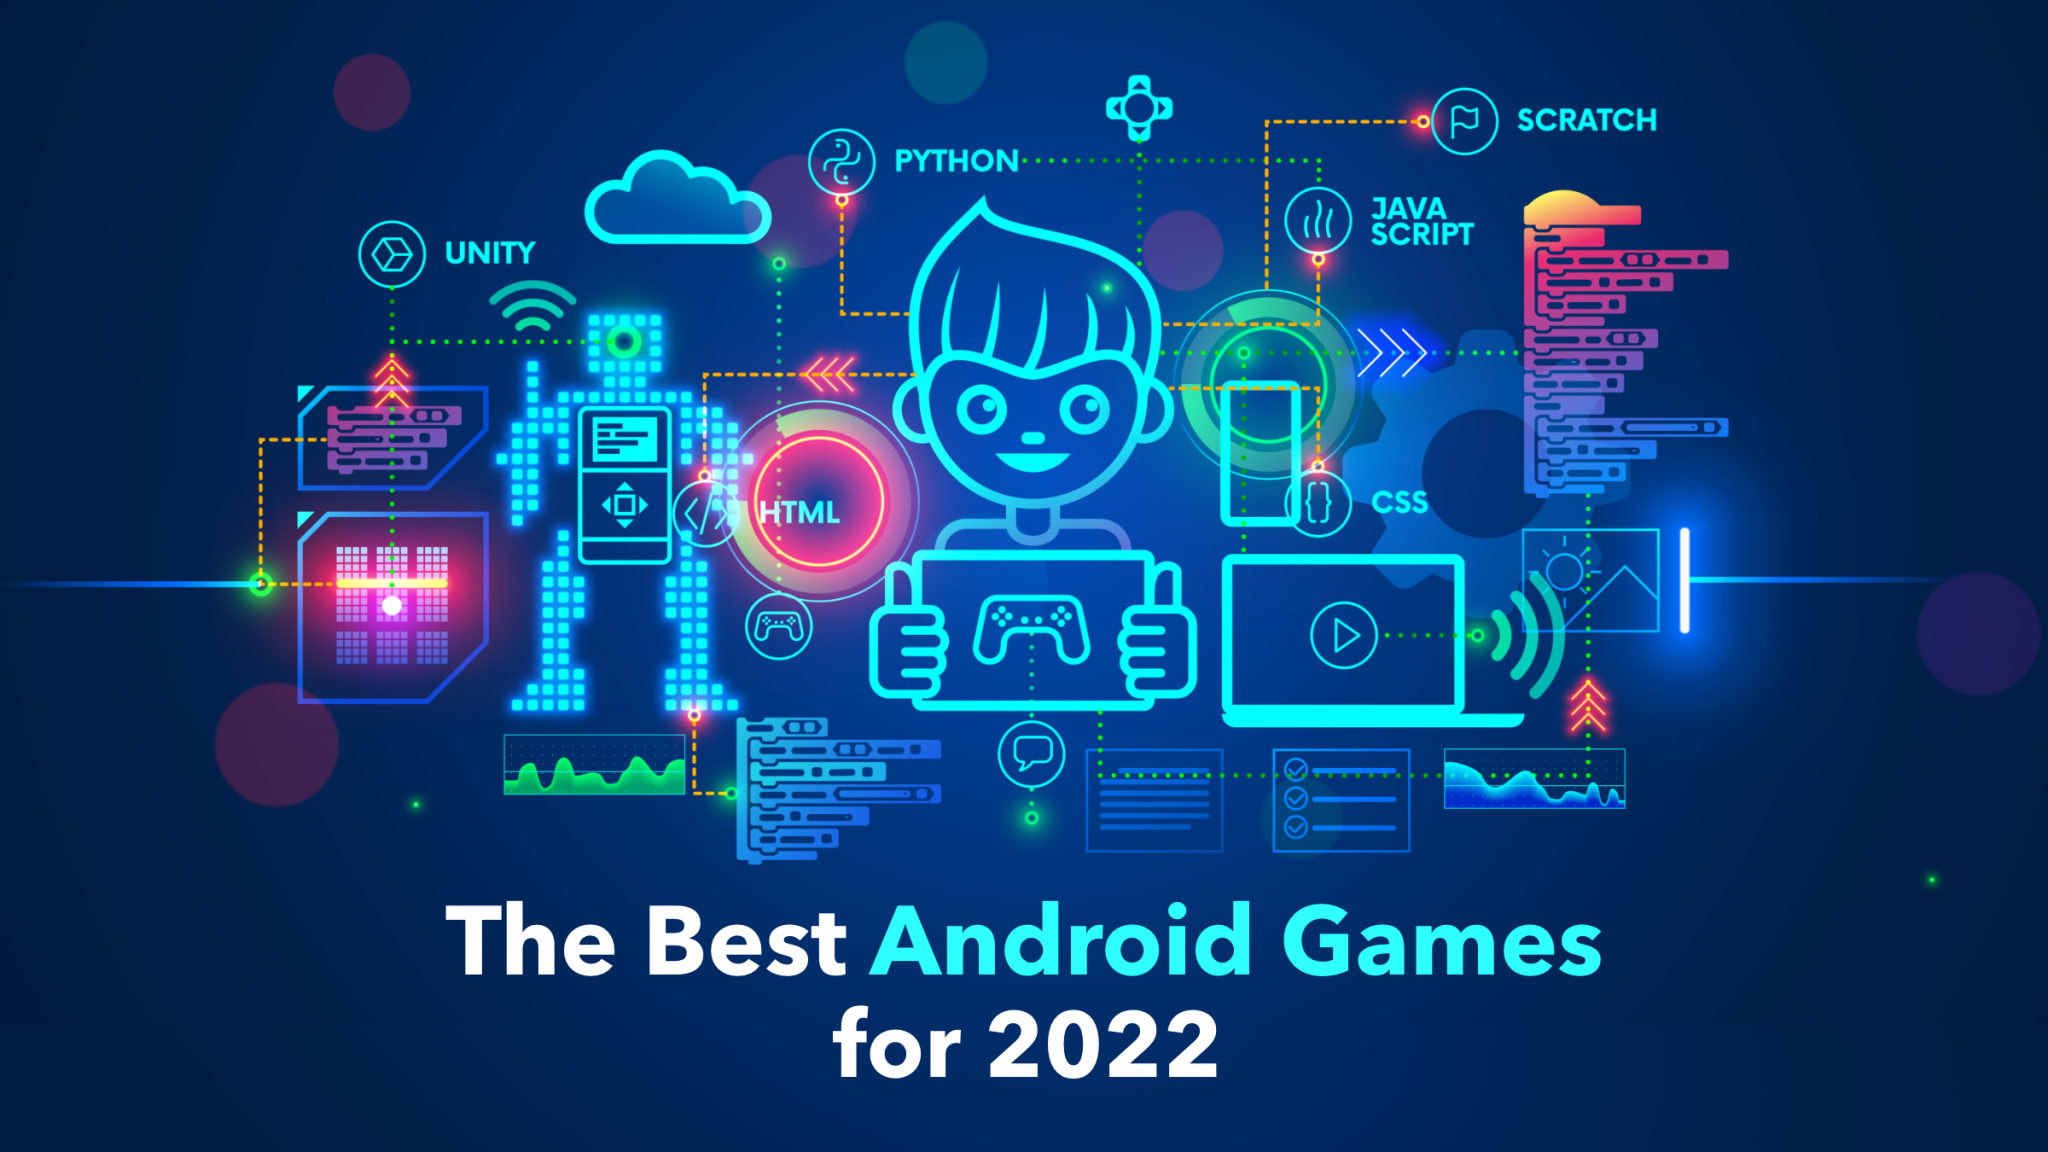 The Best Android Games for 2022